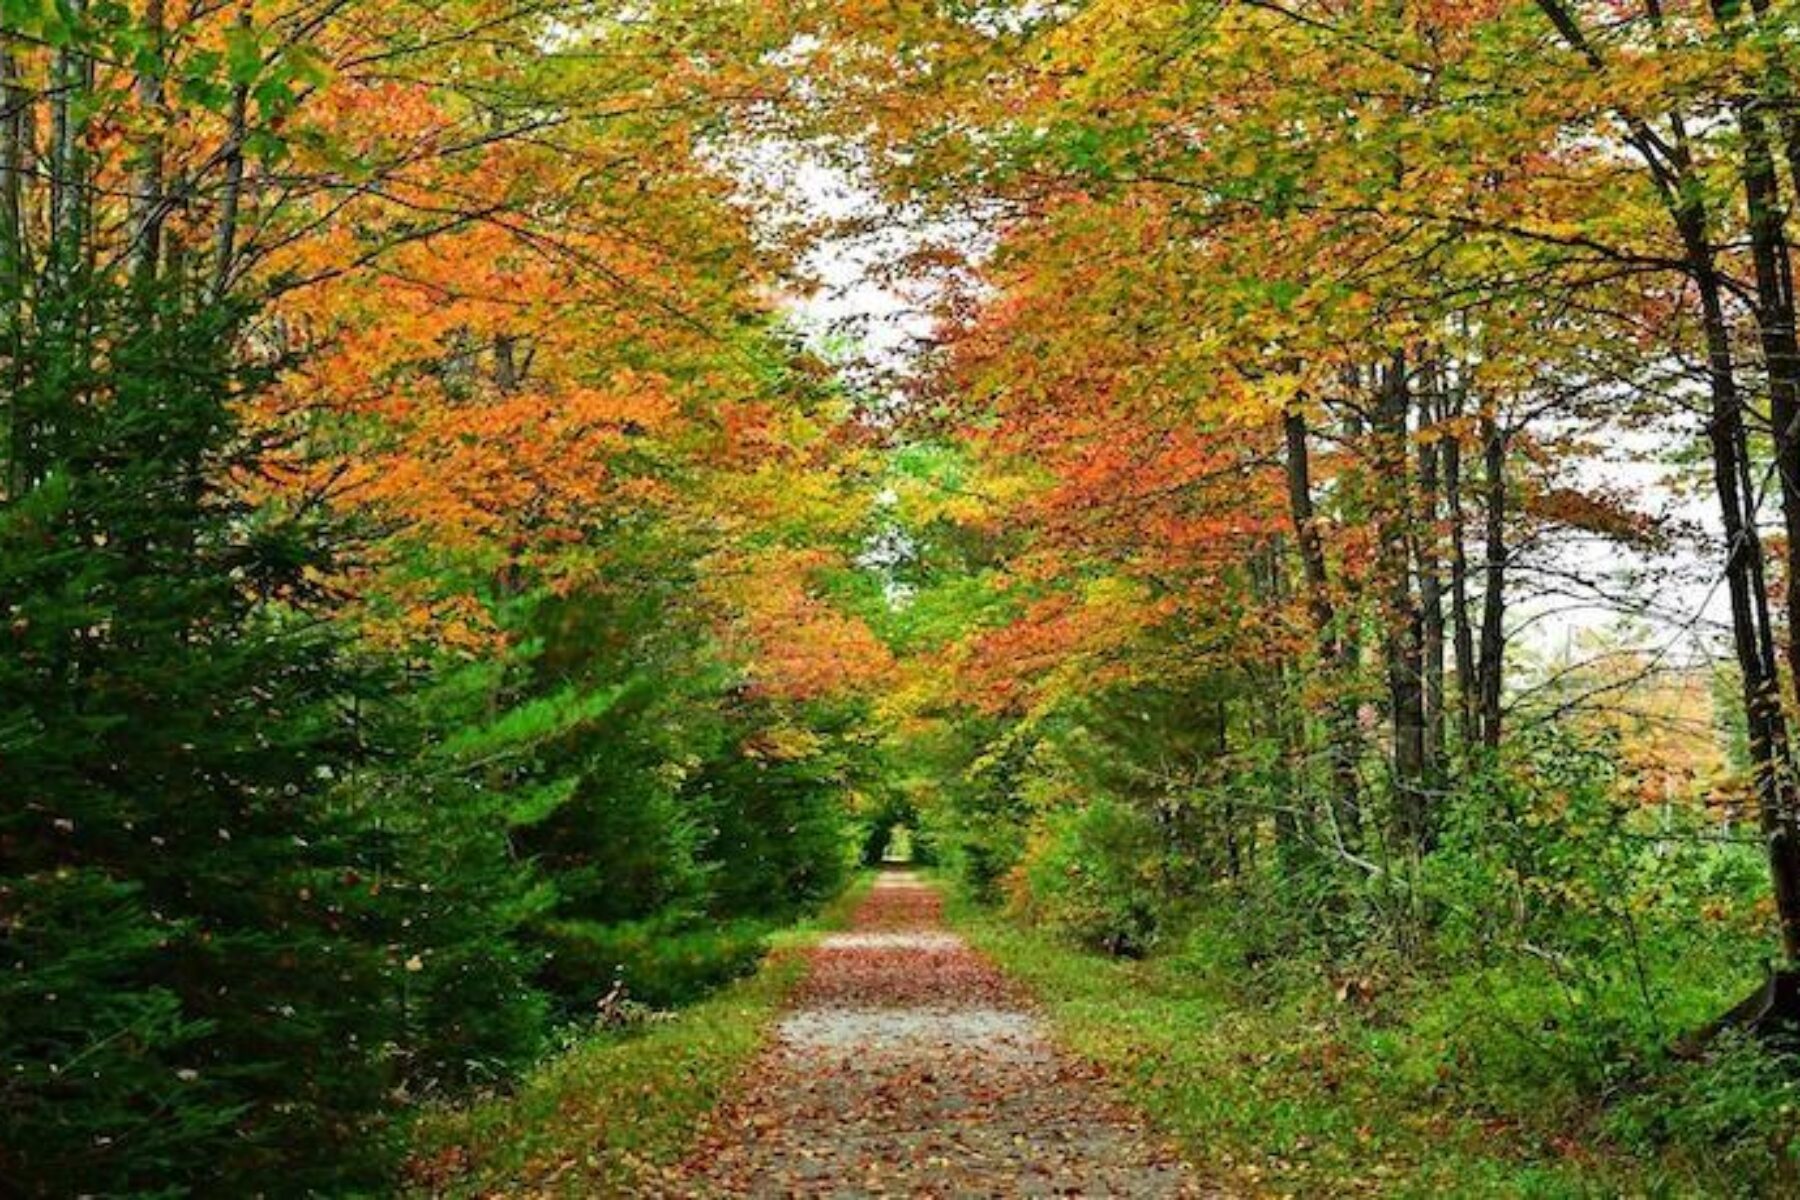 Northern Rail Trail | Photo by TrailLink user sc302